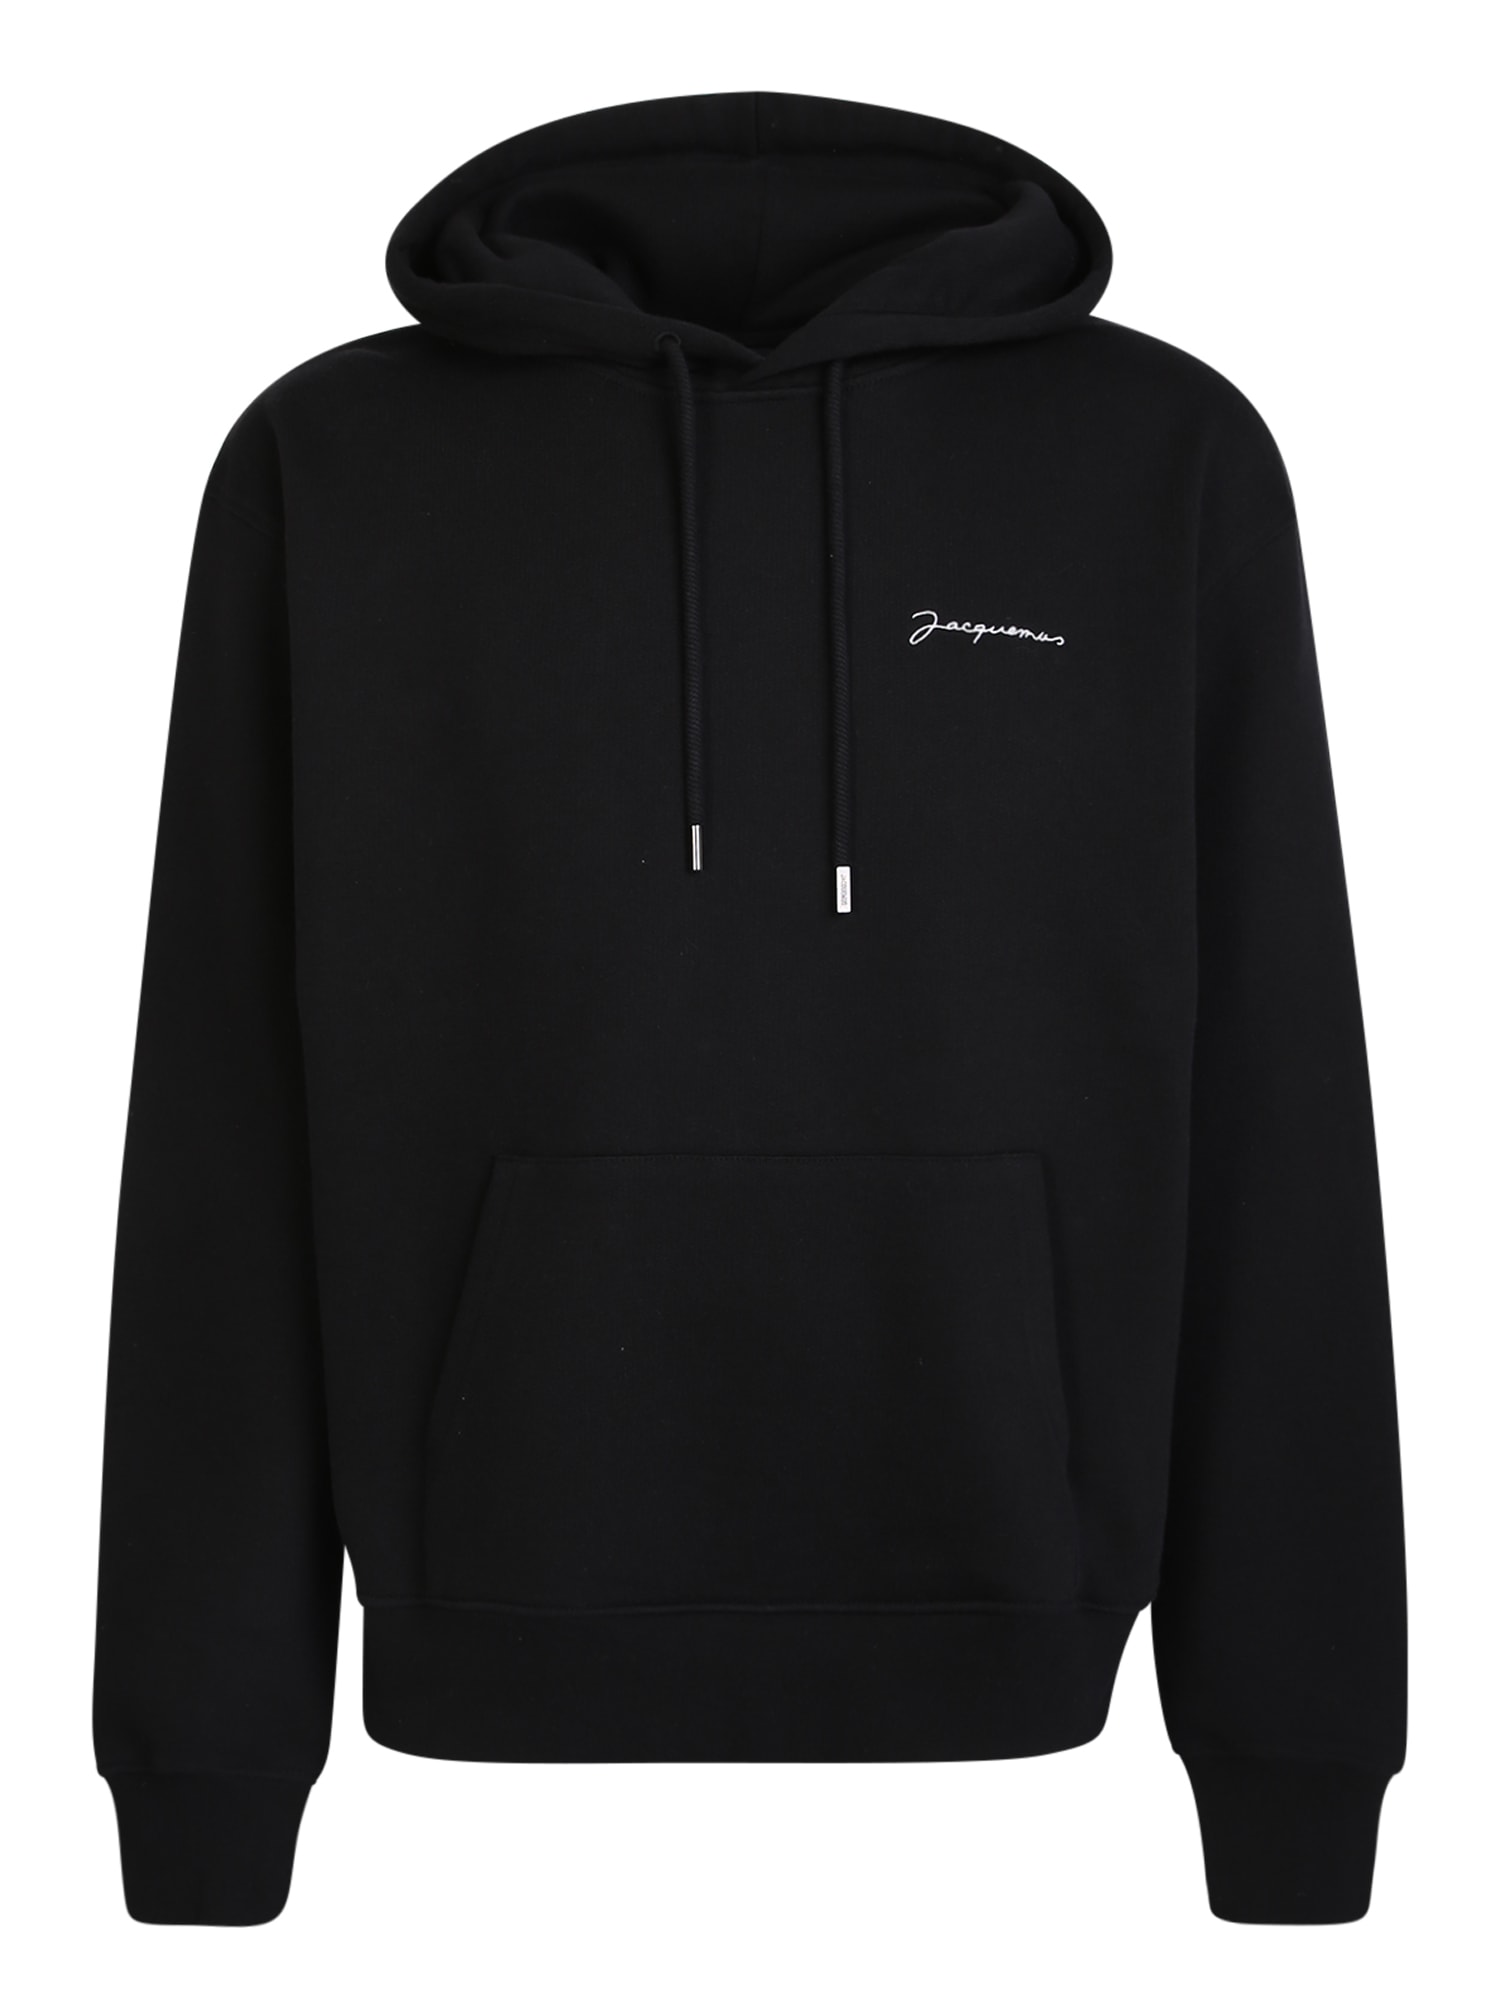 Jacquemus Hooded Sweatshirt With Embroidered Logo